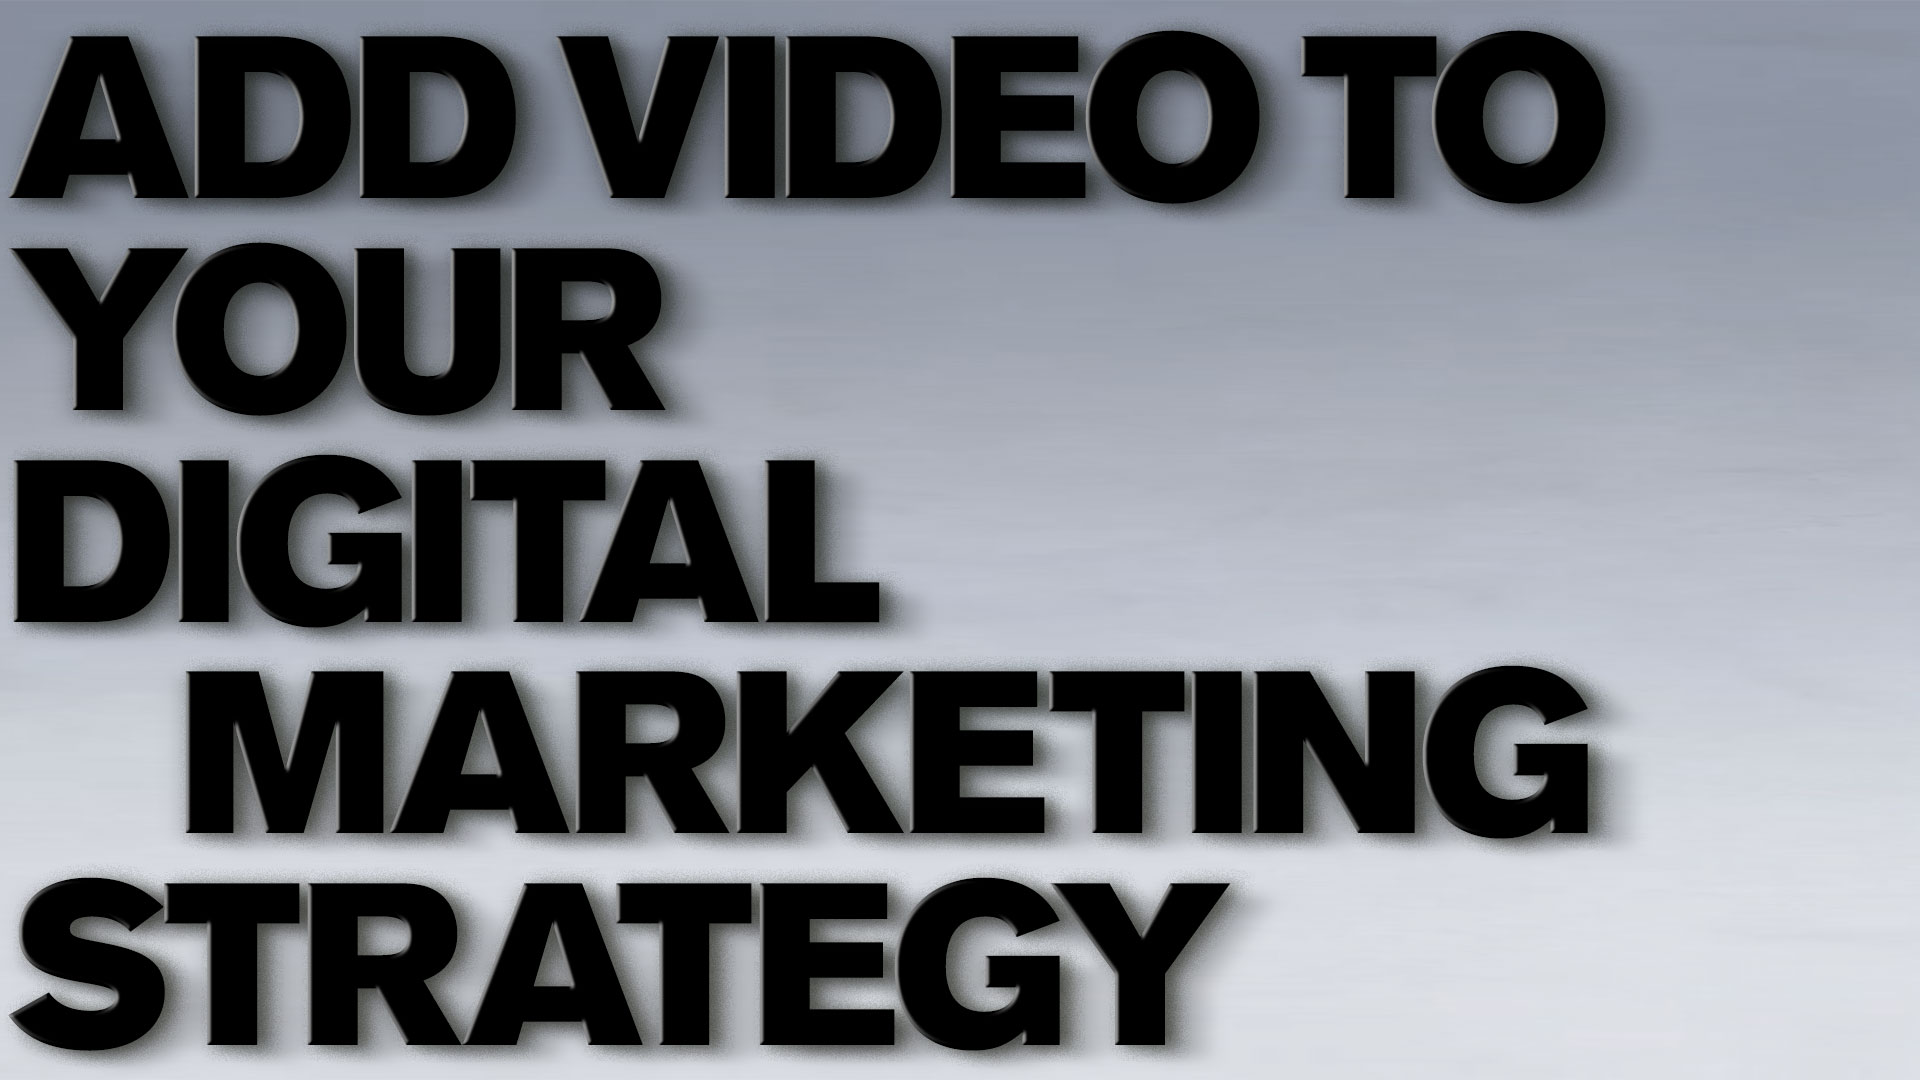 Add-Video-To-Your-Digital-Marketing-Strategy